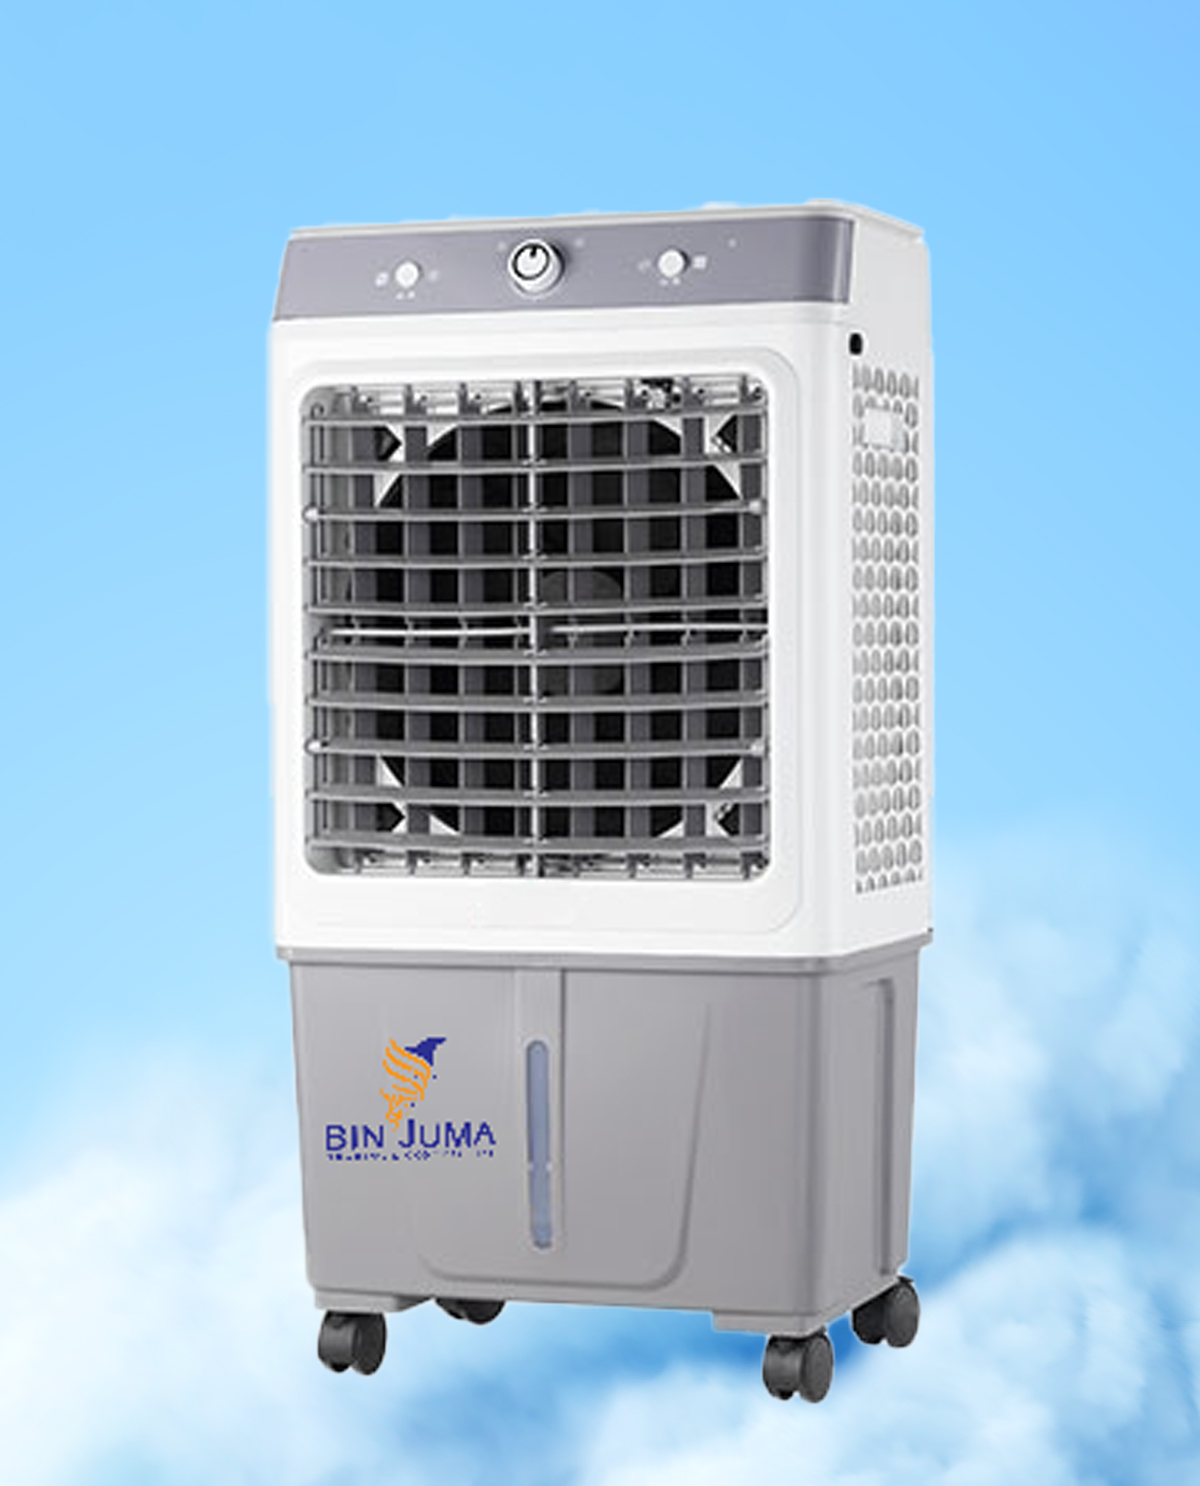 35Ltr mini air room cooler Best Prices in online